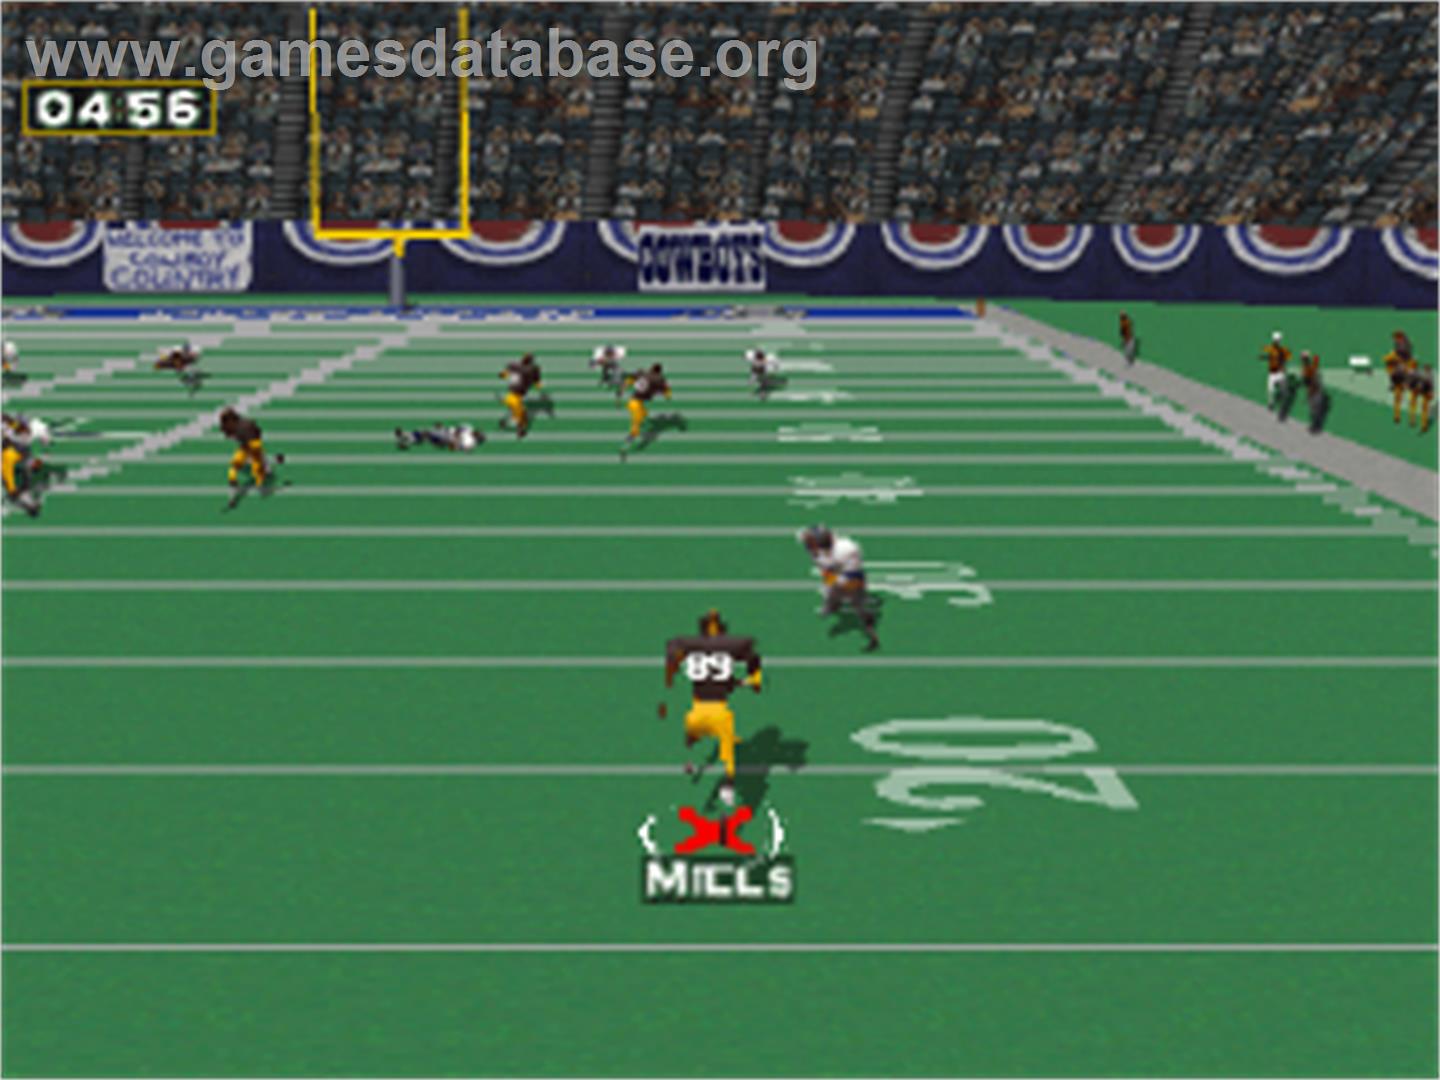 NFL GameDay '97 - Sony Playstation - Artwork - In Game